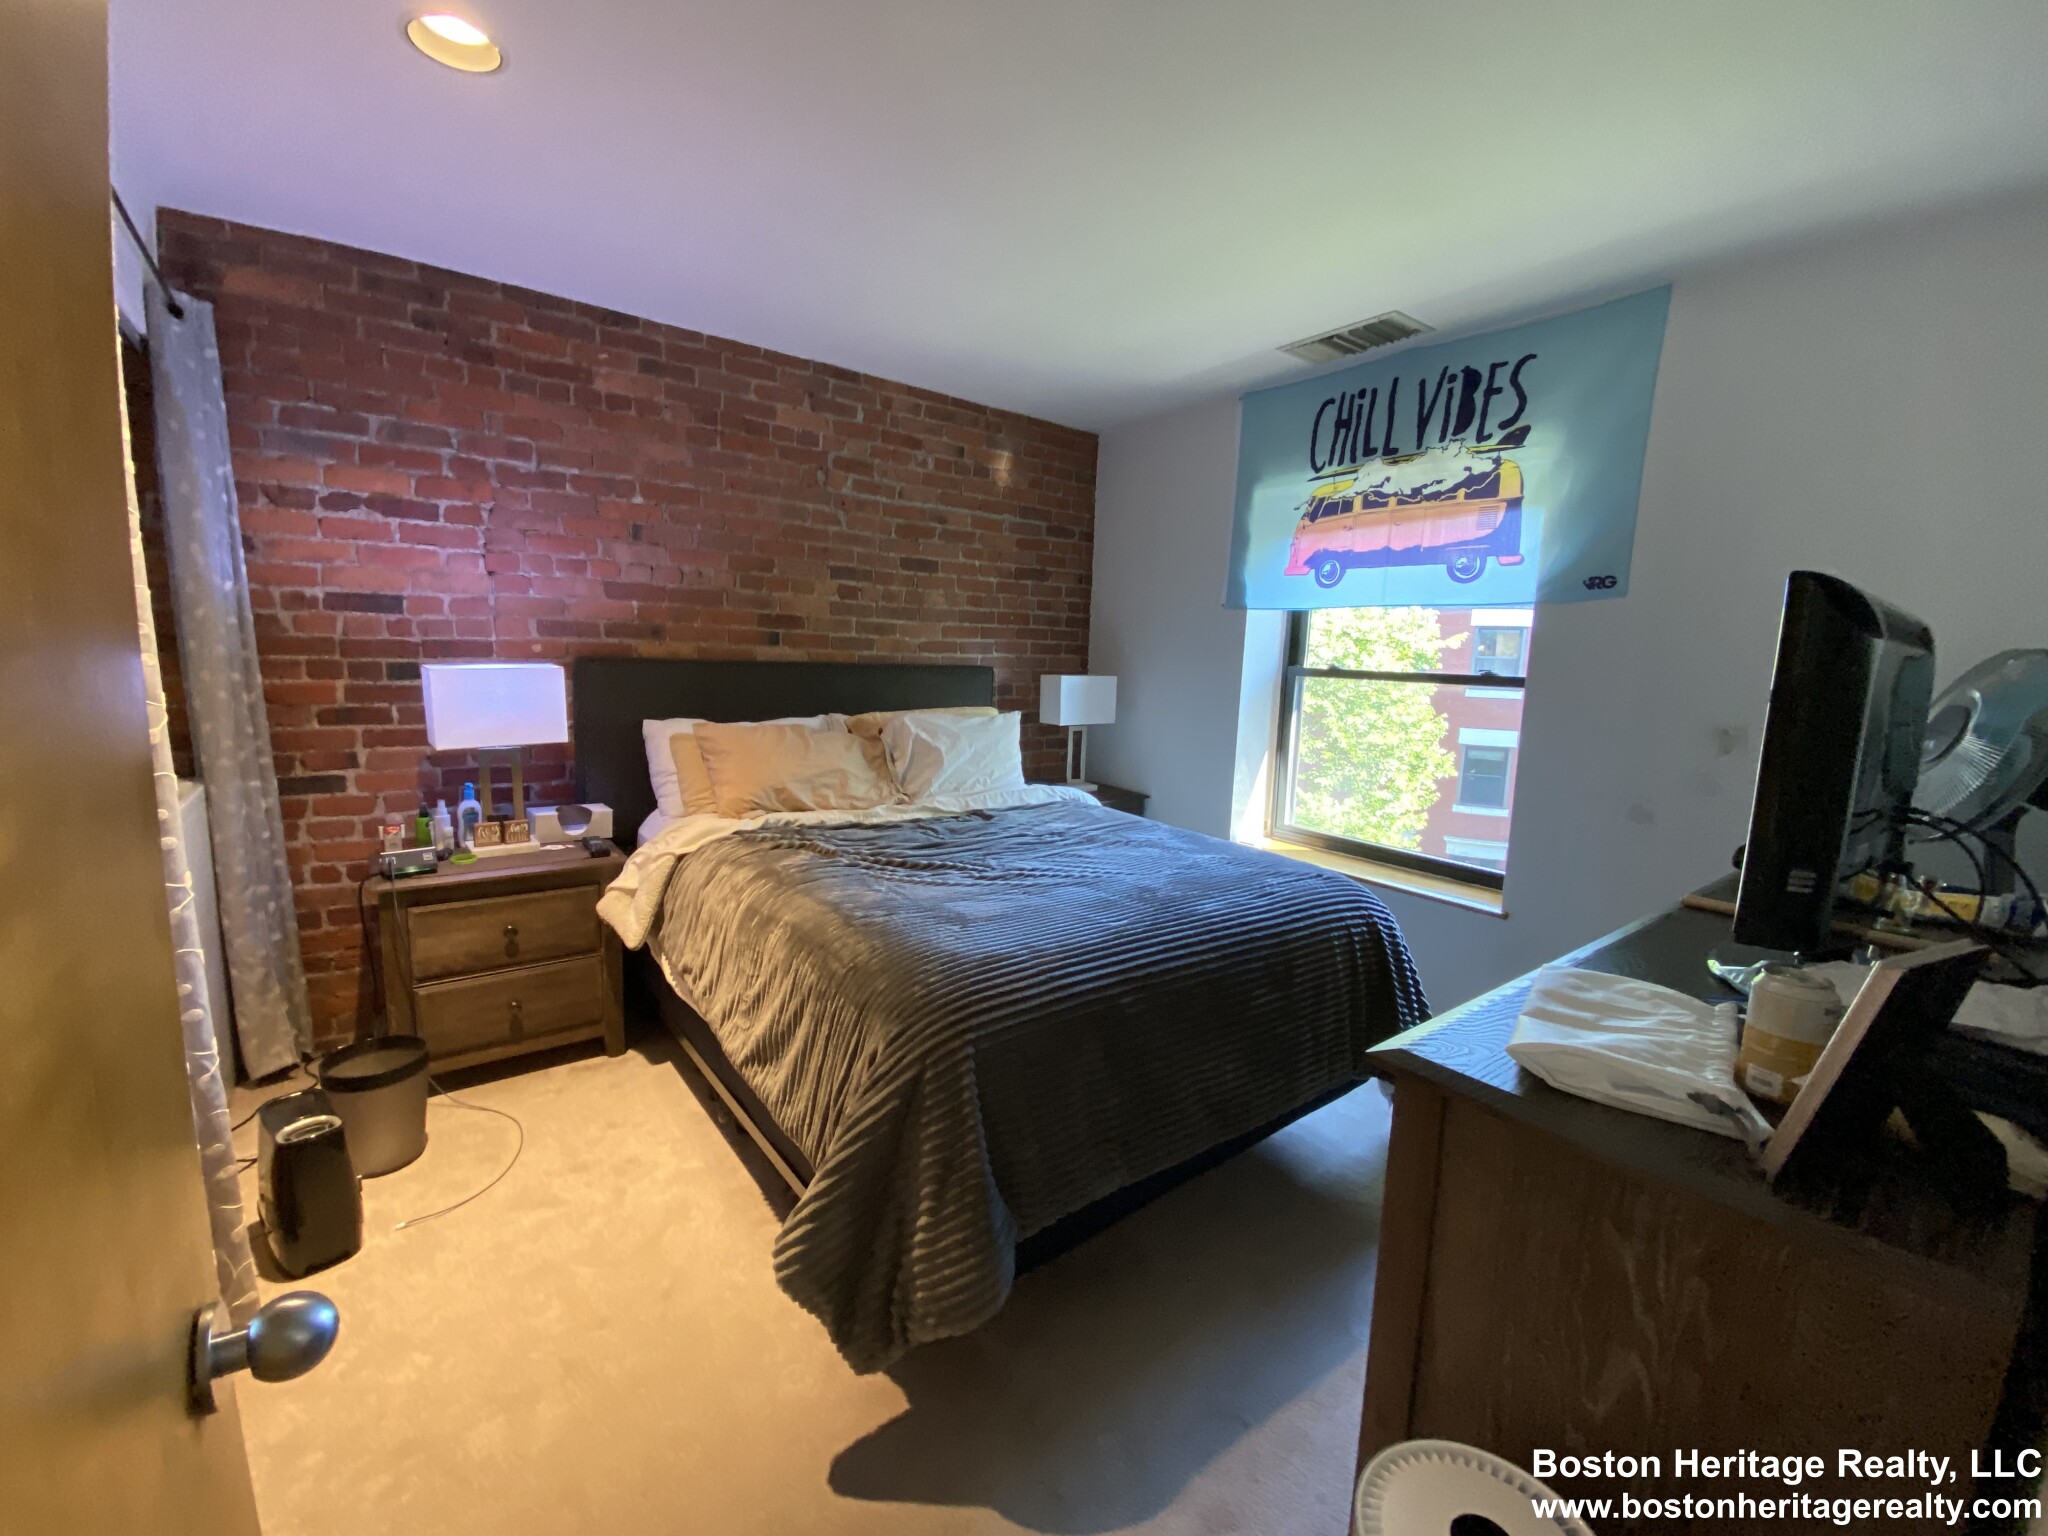 1 Bed, 1 Bath apartment in Boston, Fenway for $2,750